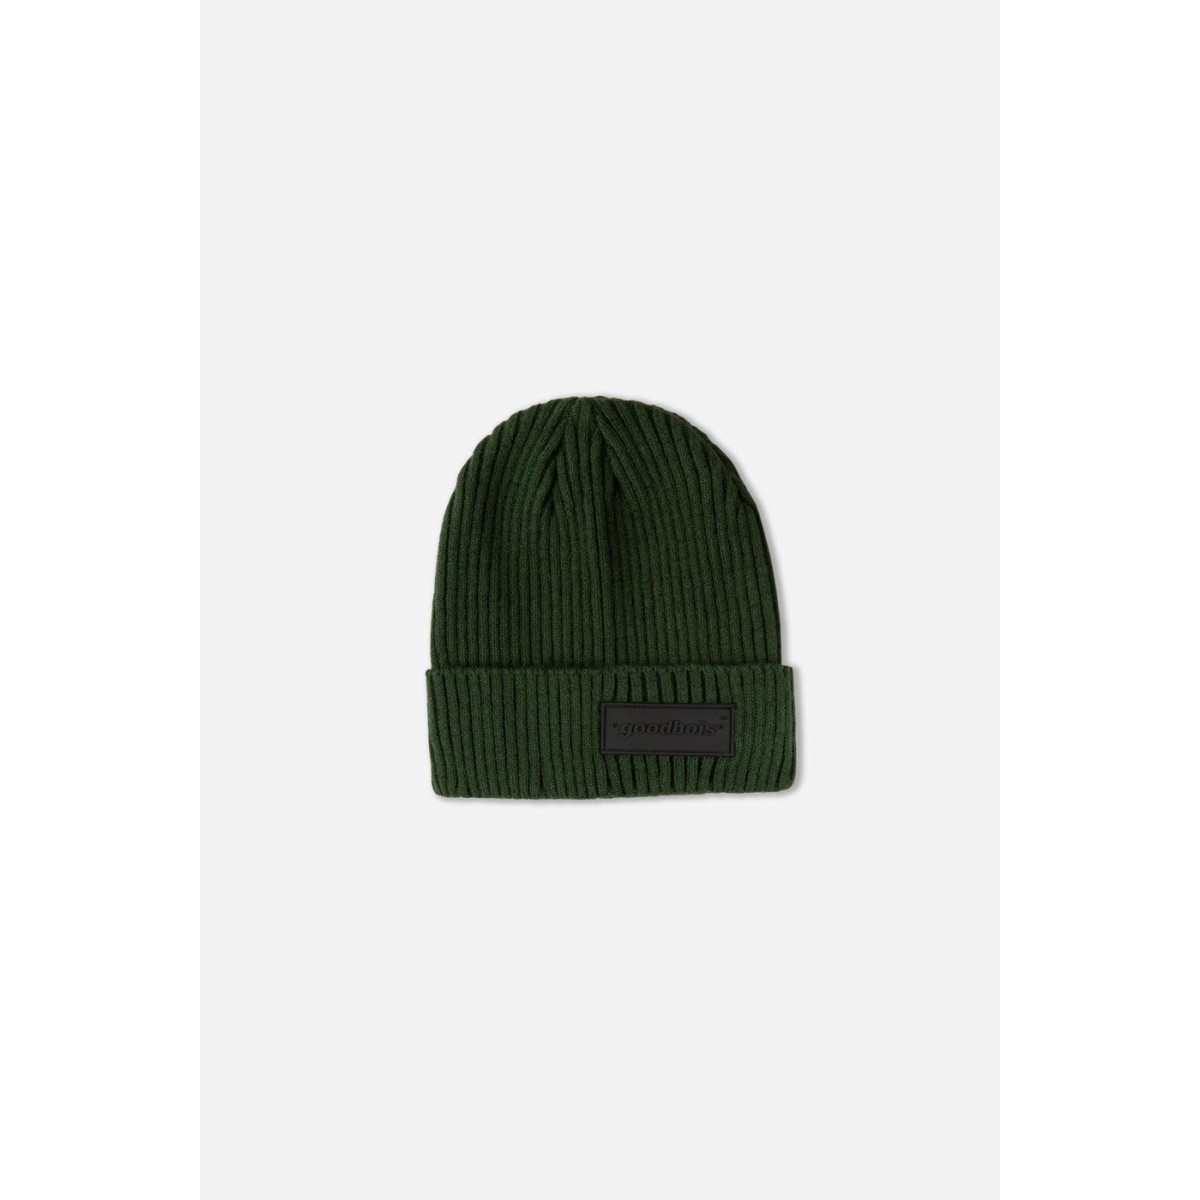 GOODBOIS - OFFICIAL CORE BEANIE FRST